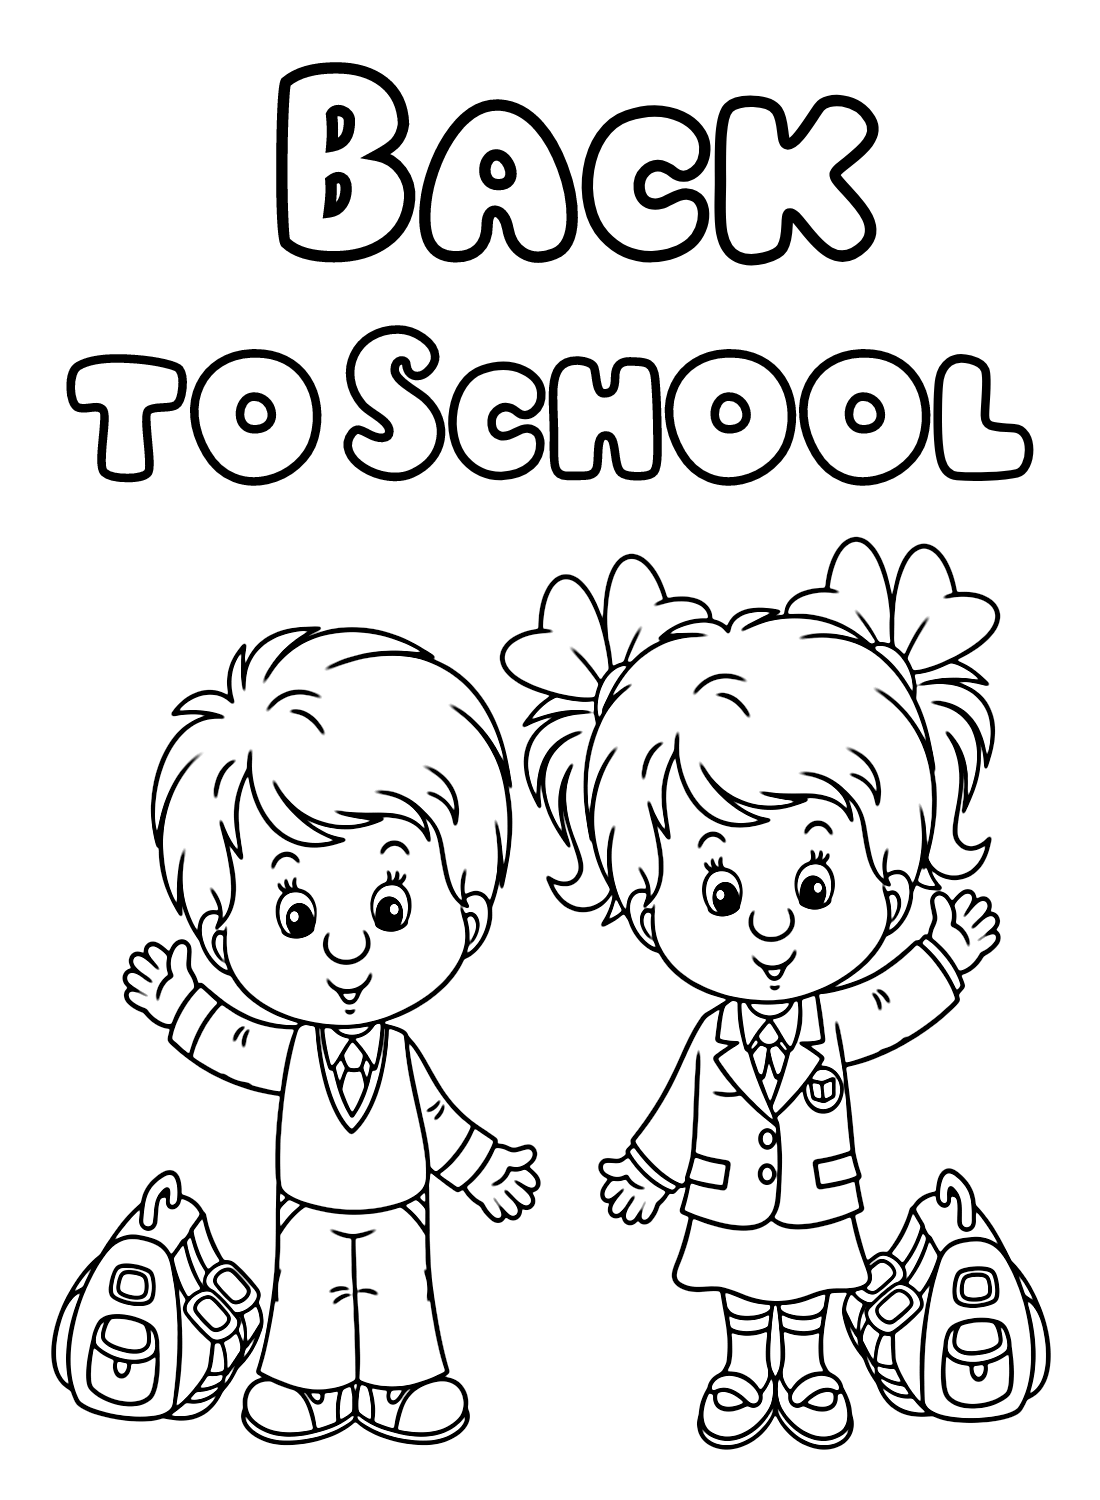 Printable Back to School Coloring from Back to School